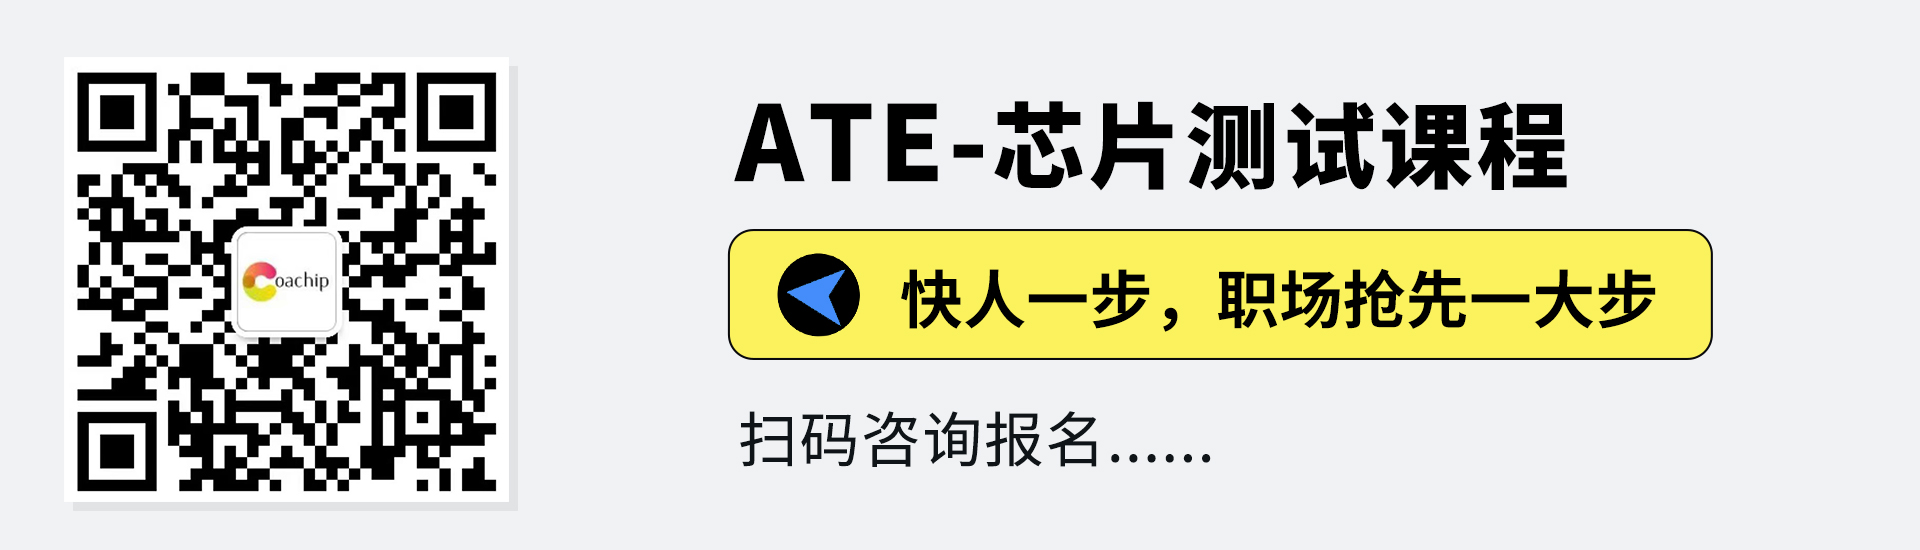 ATE测试